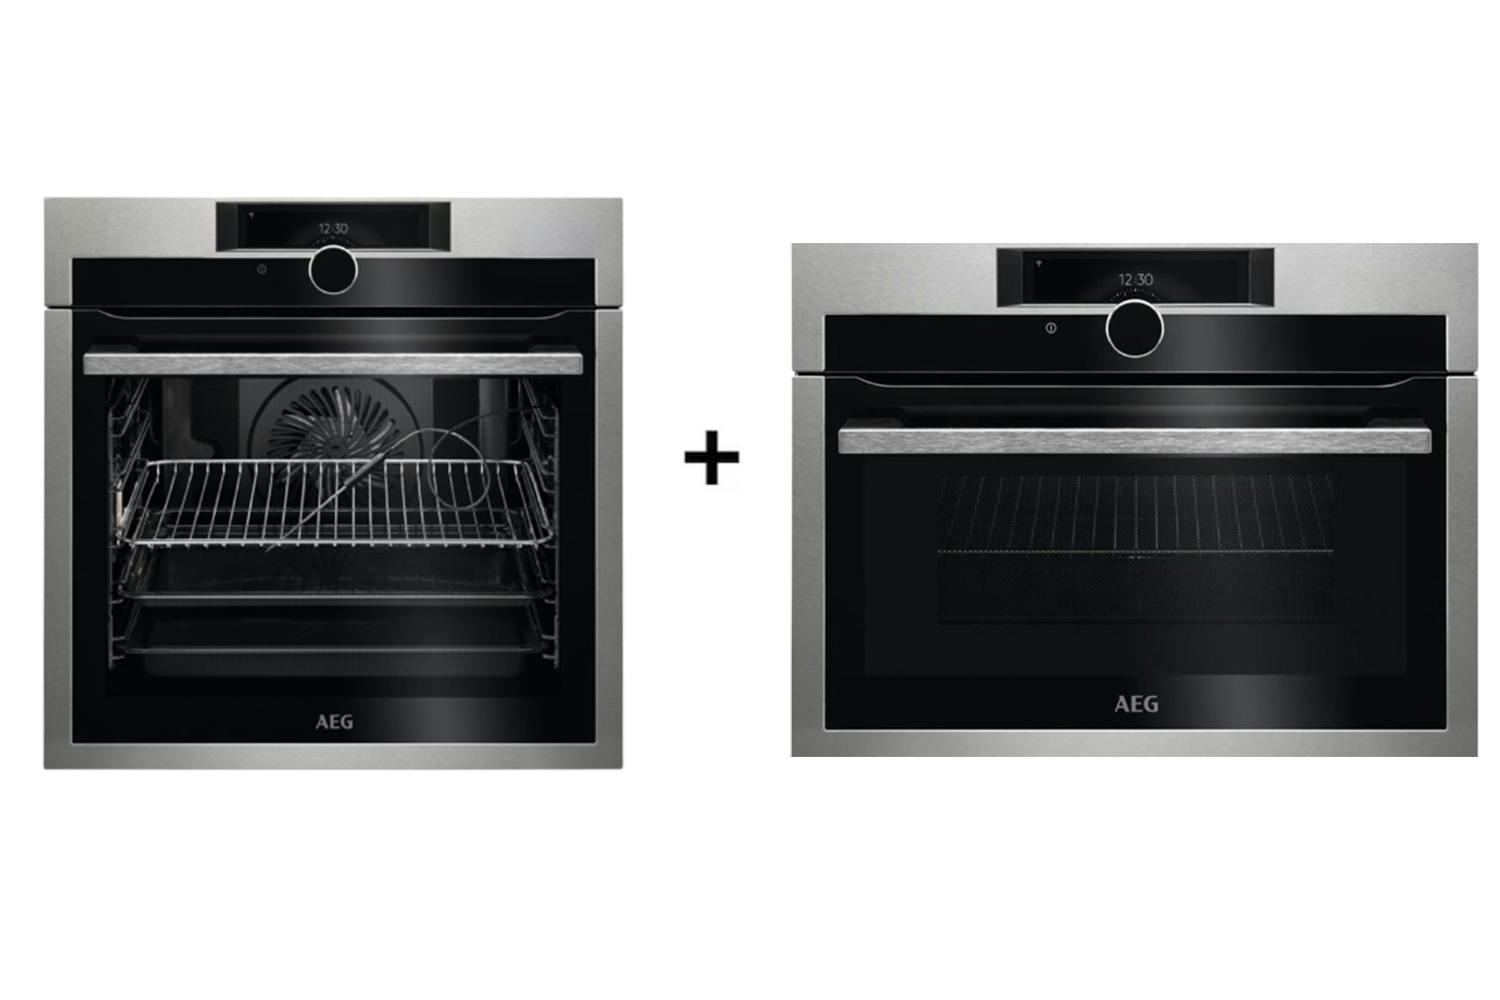 AEG Built-In Electric Single Oven and Single Compact Oven bundle